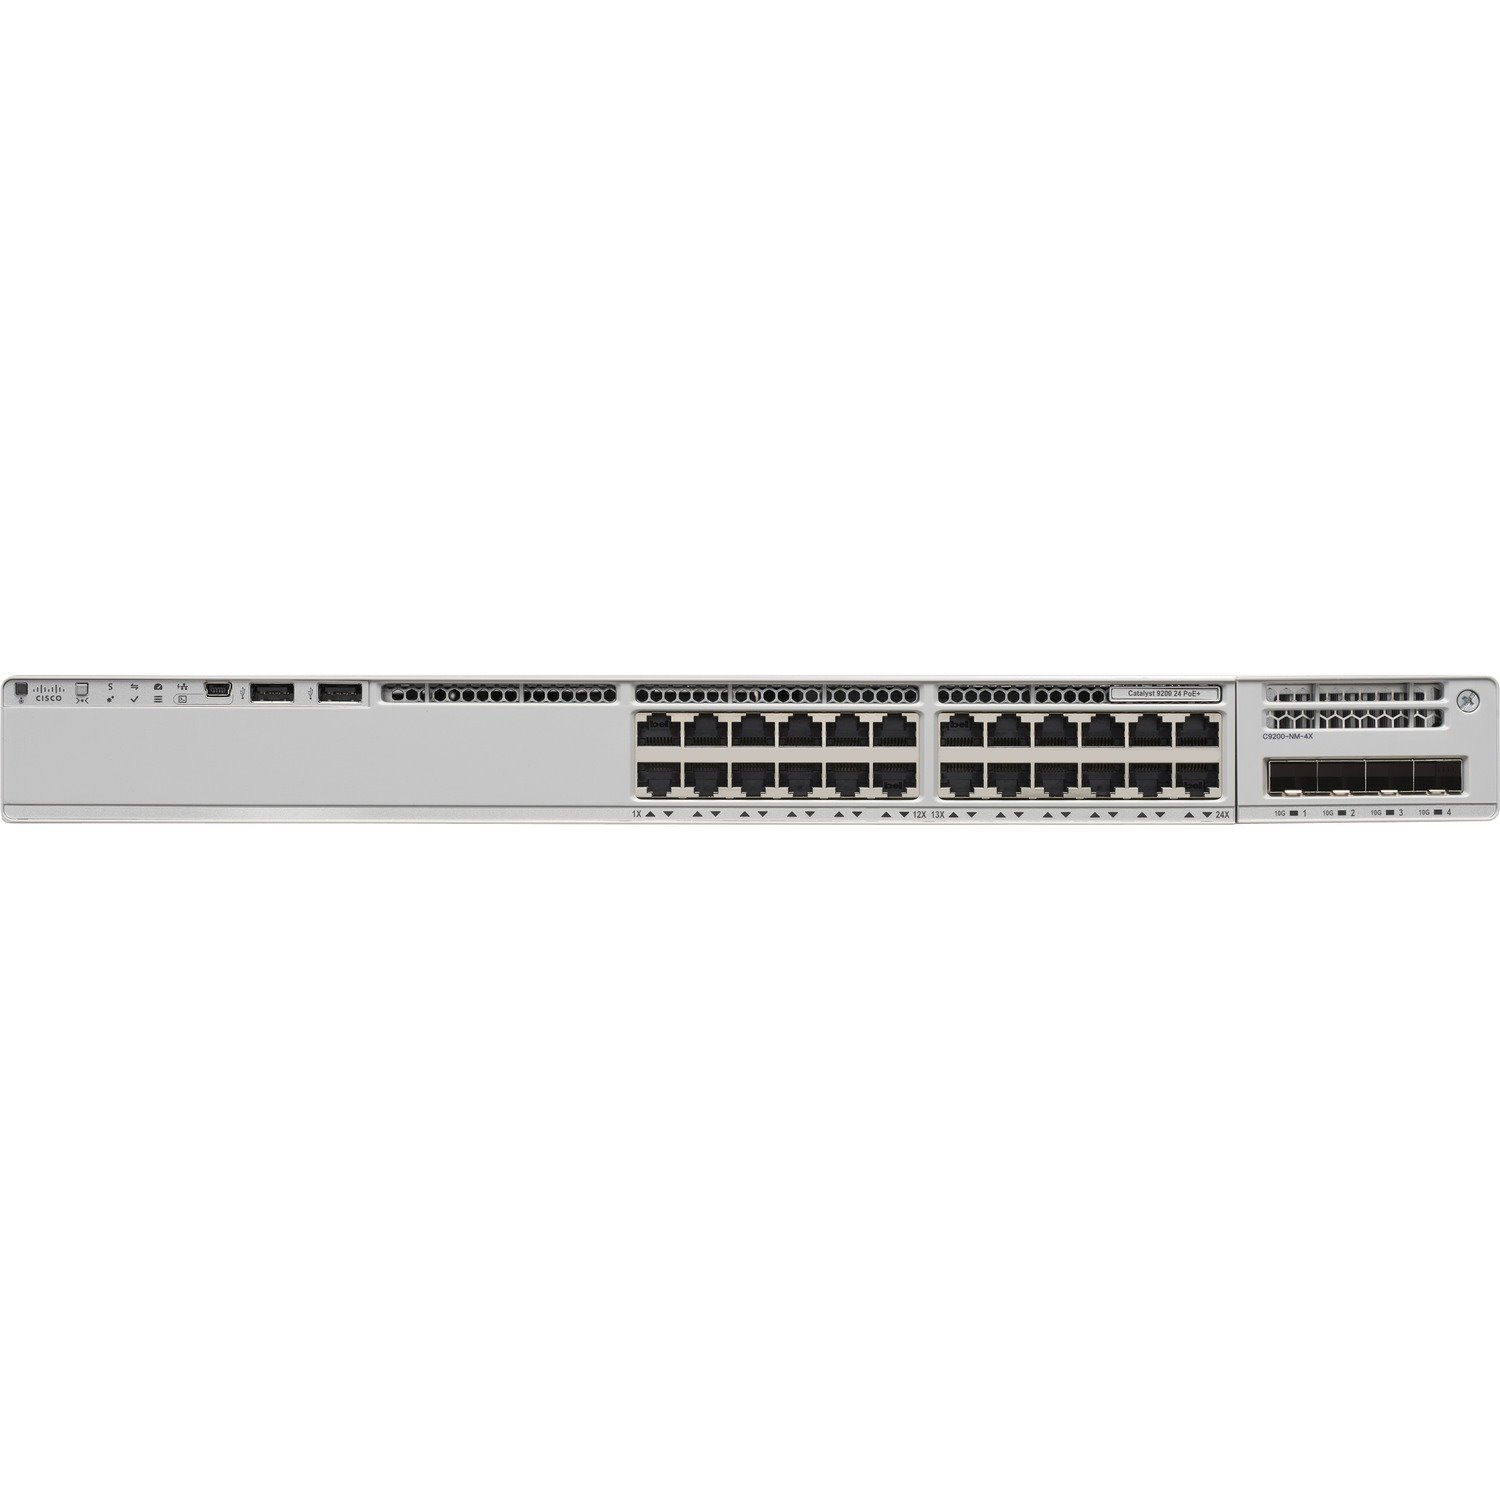 Cisco Catalyst 9200 C9200-24P 24 Ports Manageable Ethernet Switch